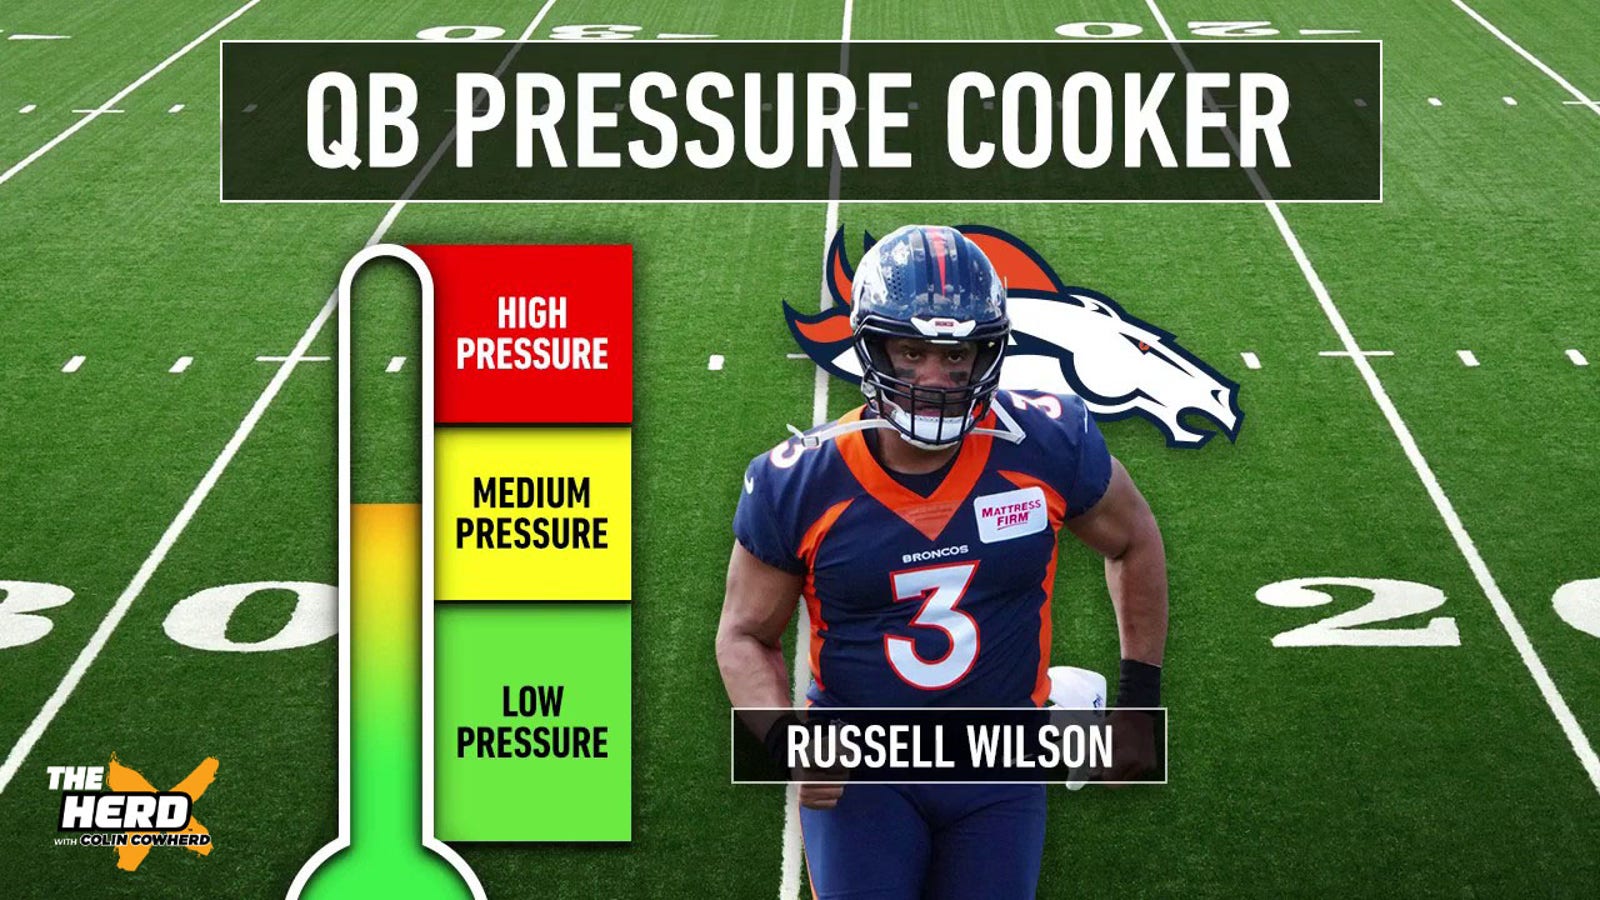 Russell Wilson, Aaron Rodgers highlight Colin's QB pressure cooker scale